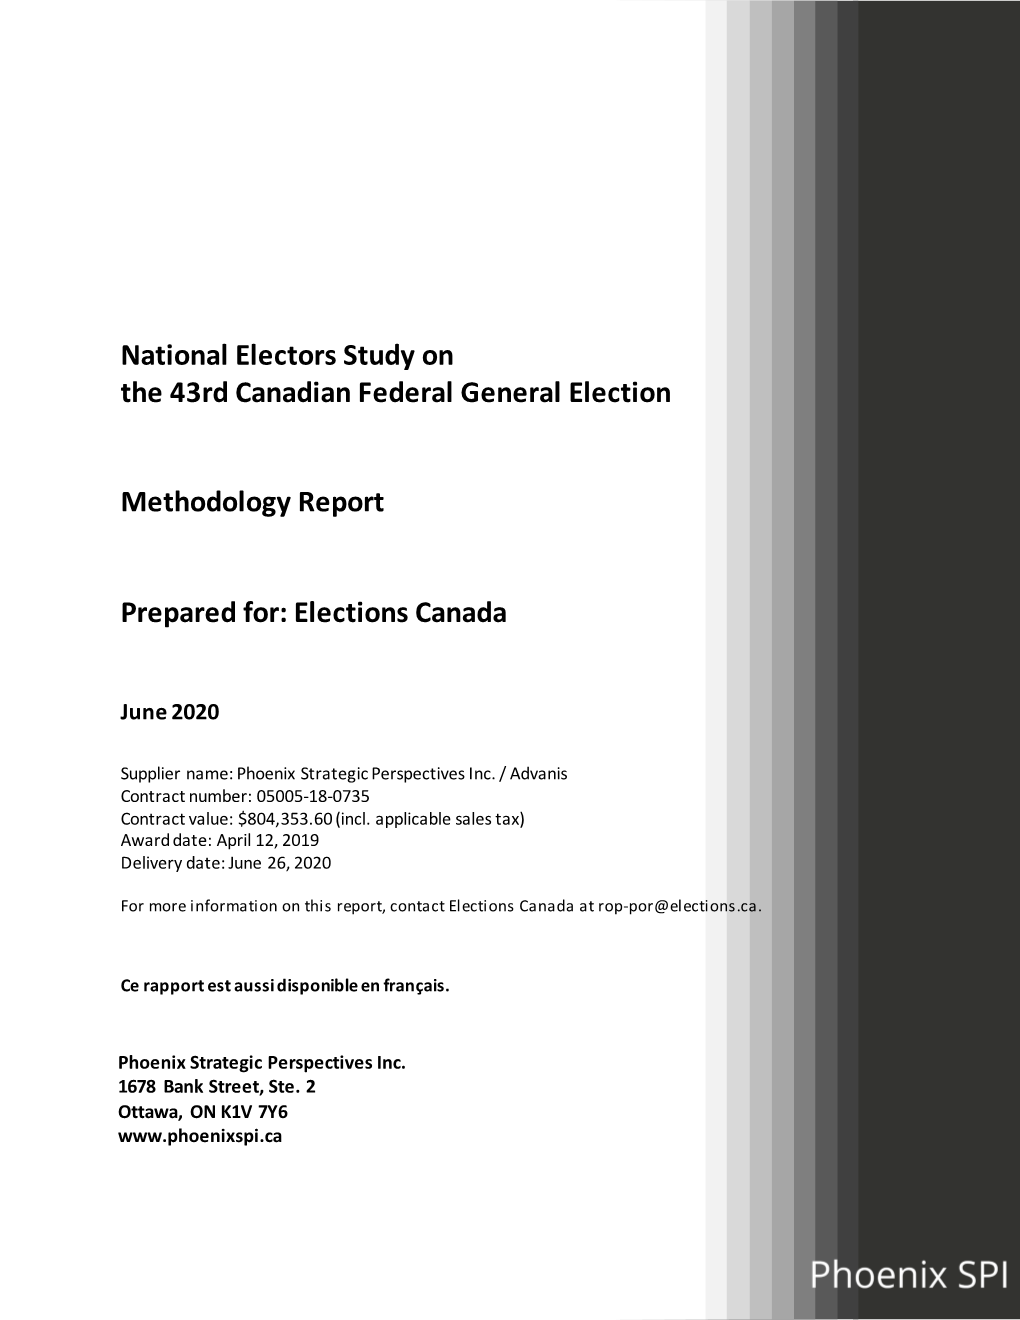 National Electors Study on the 43Rd Canadian Federal General Election